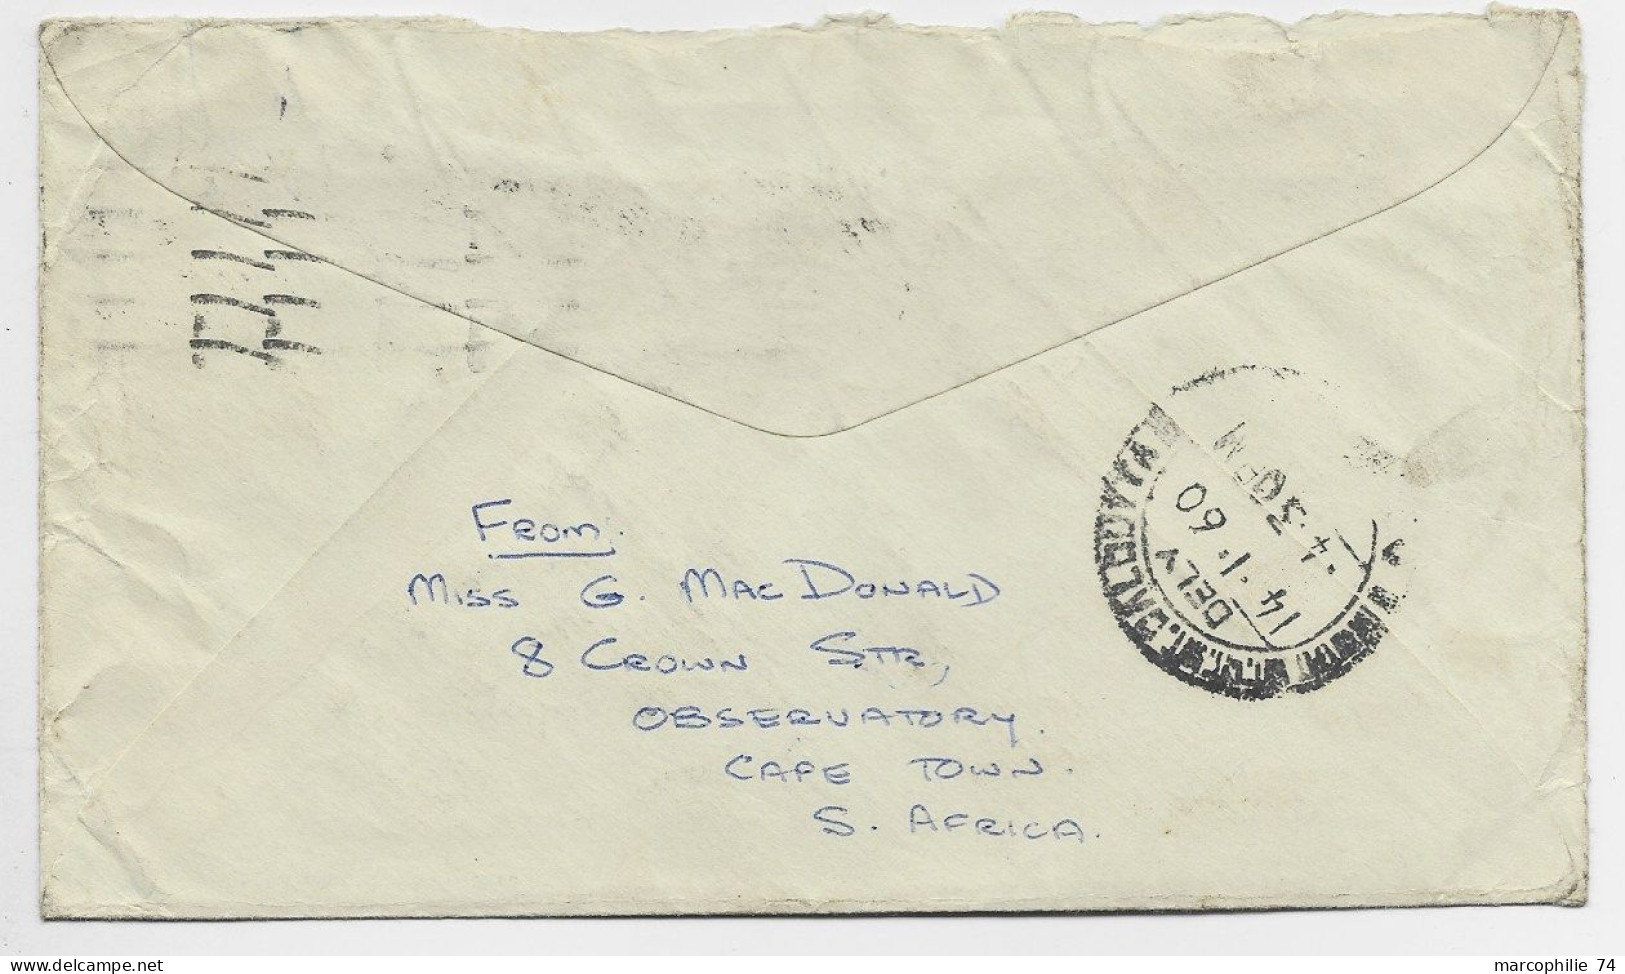 SUD AFRICA 6D LION +1/3 LETTRE COVER AVION CAPE TOWN 9.1.1960 TO CALCUTTA INDIA - Covers & Documents